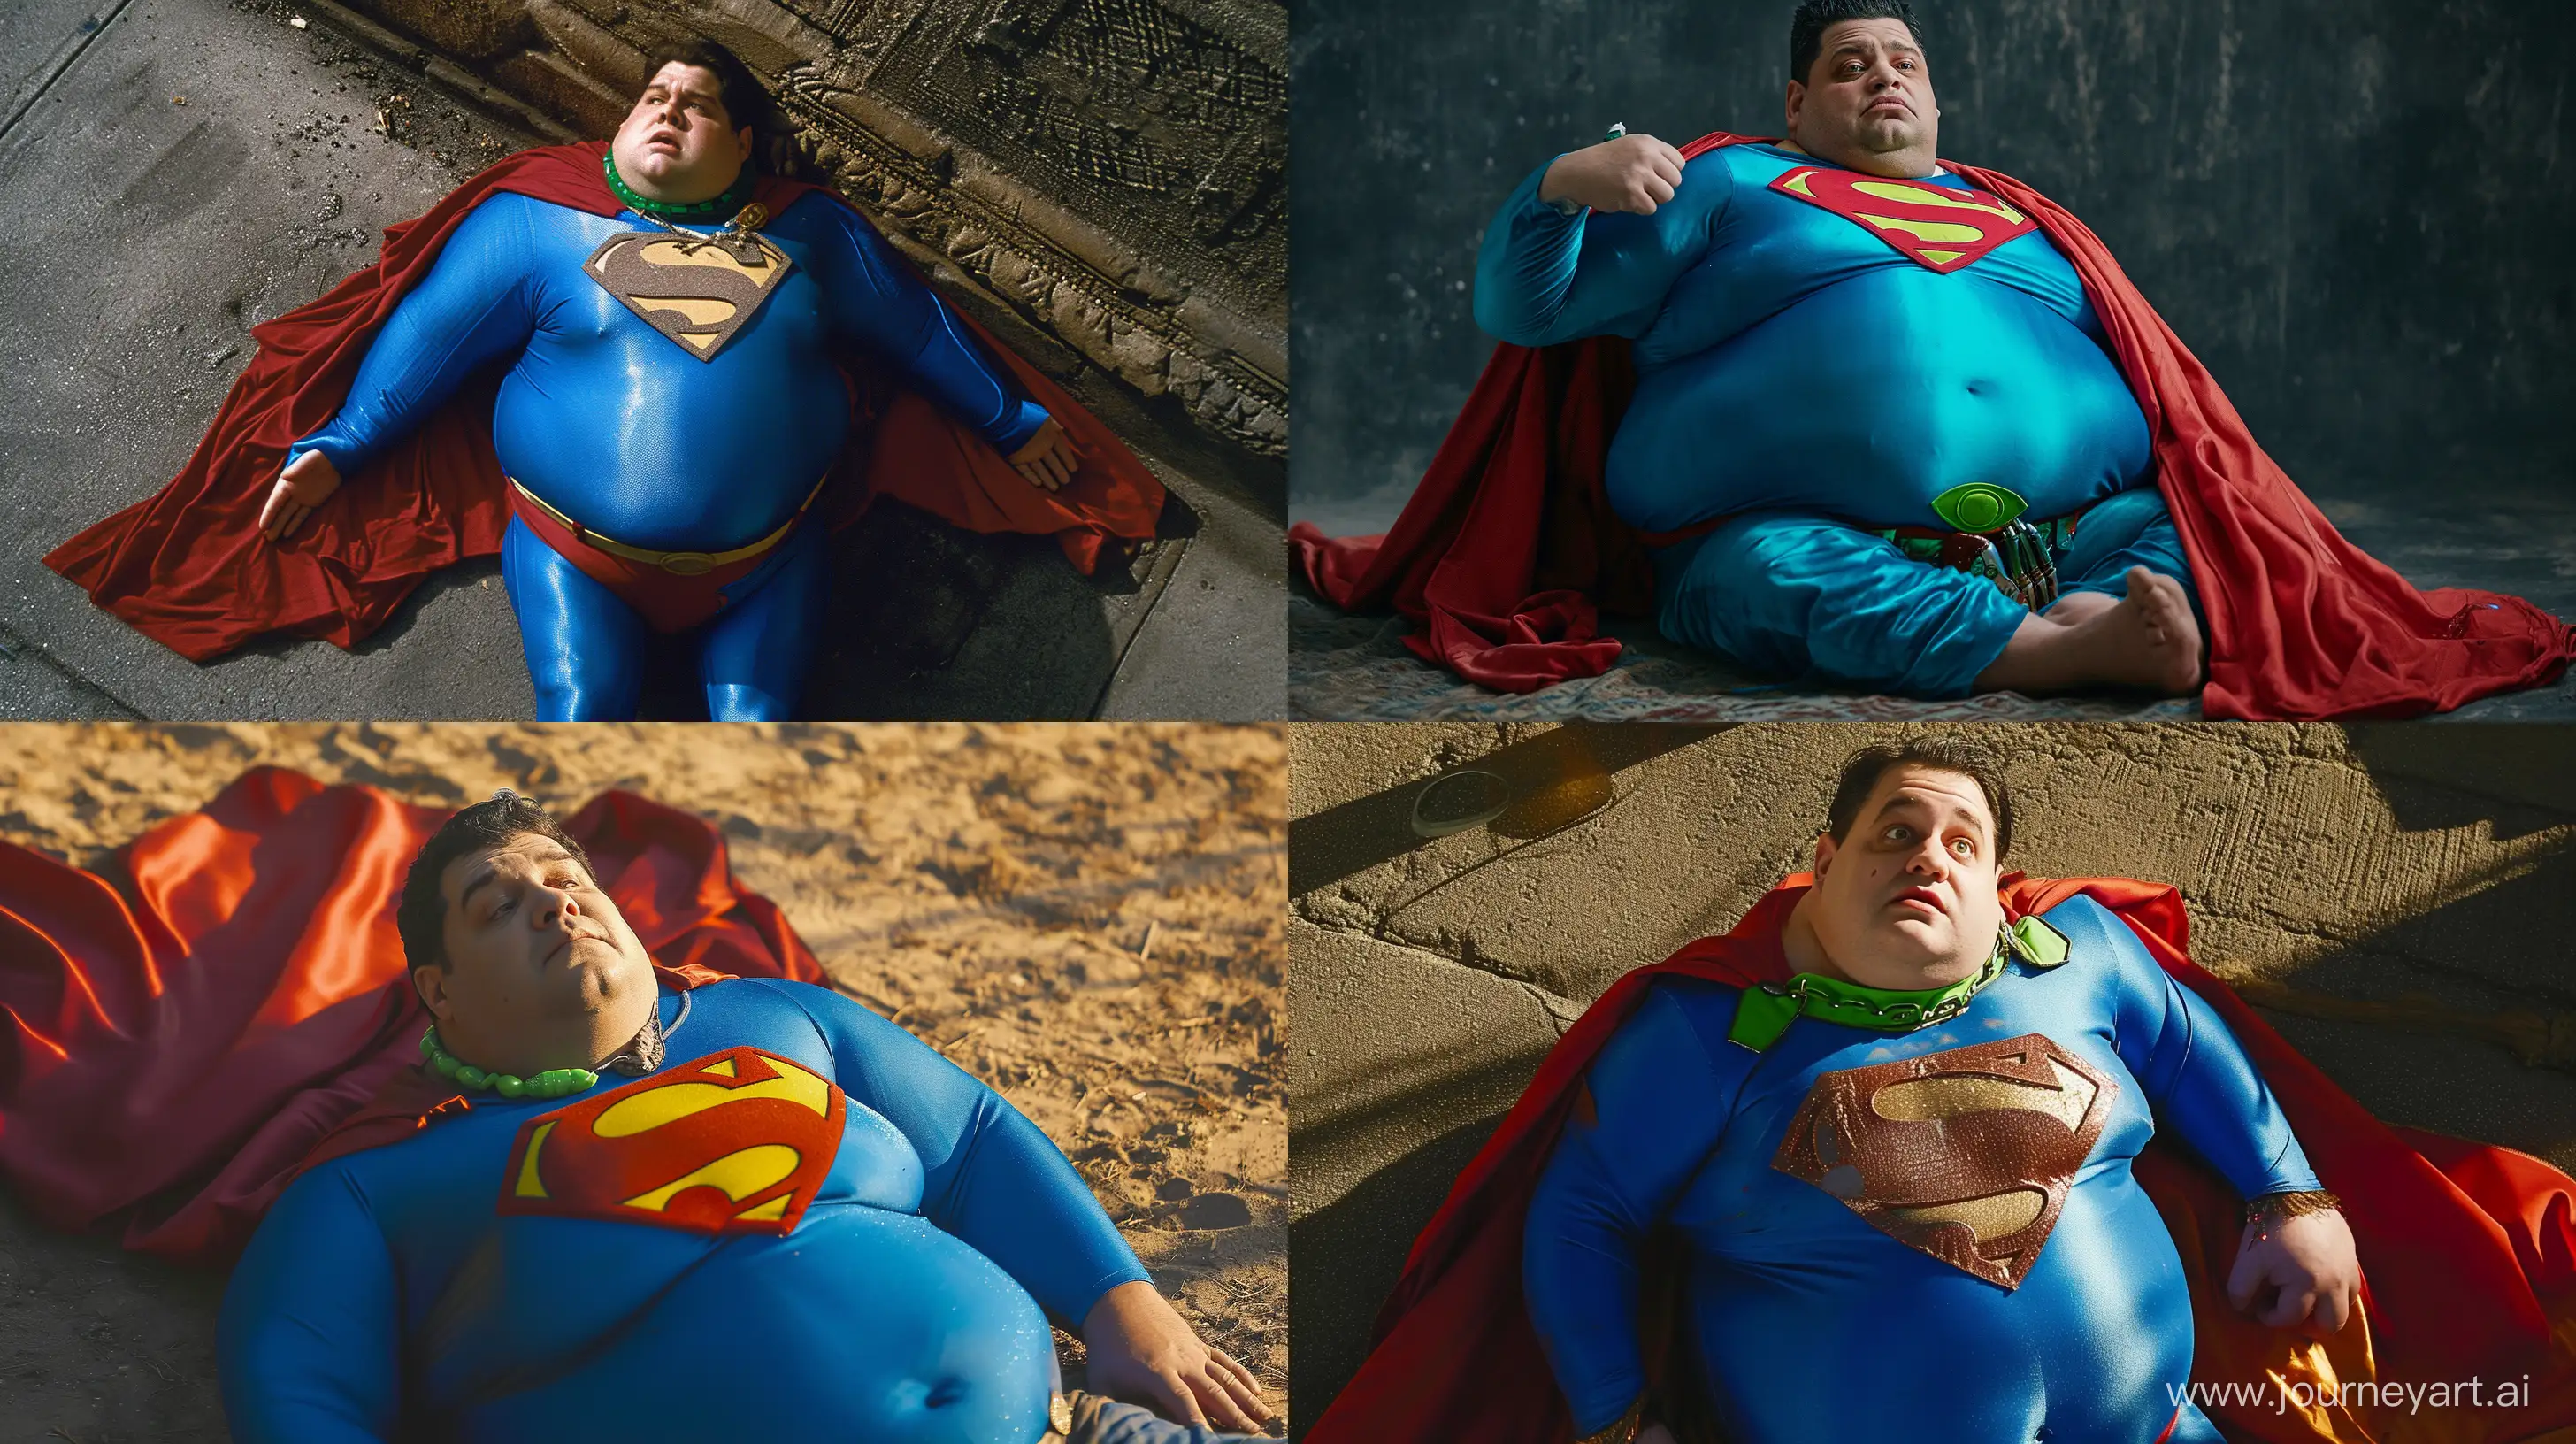 Cheerful-Superman-Lounge-Chubby-Man-in-Bright-Blue-Costume-with-Red-Cape